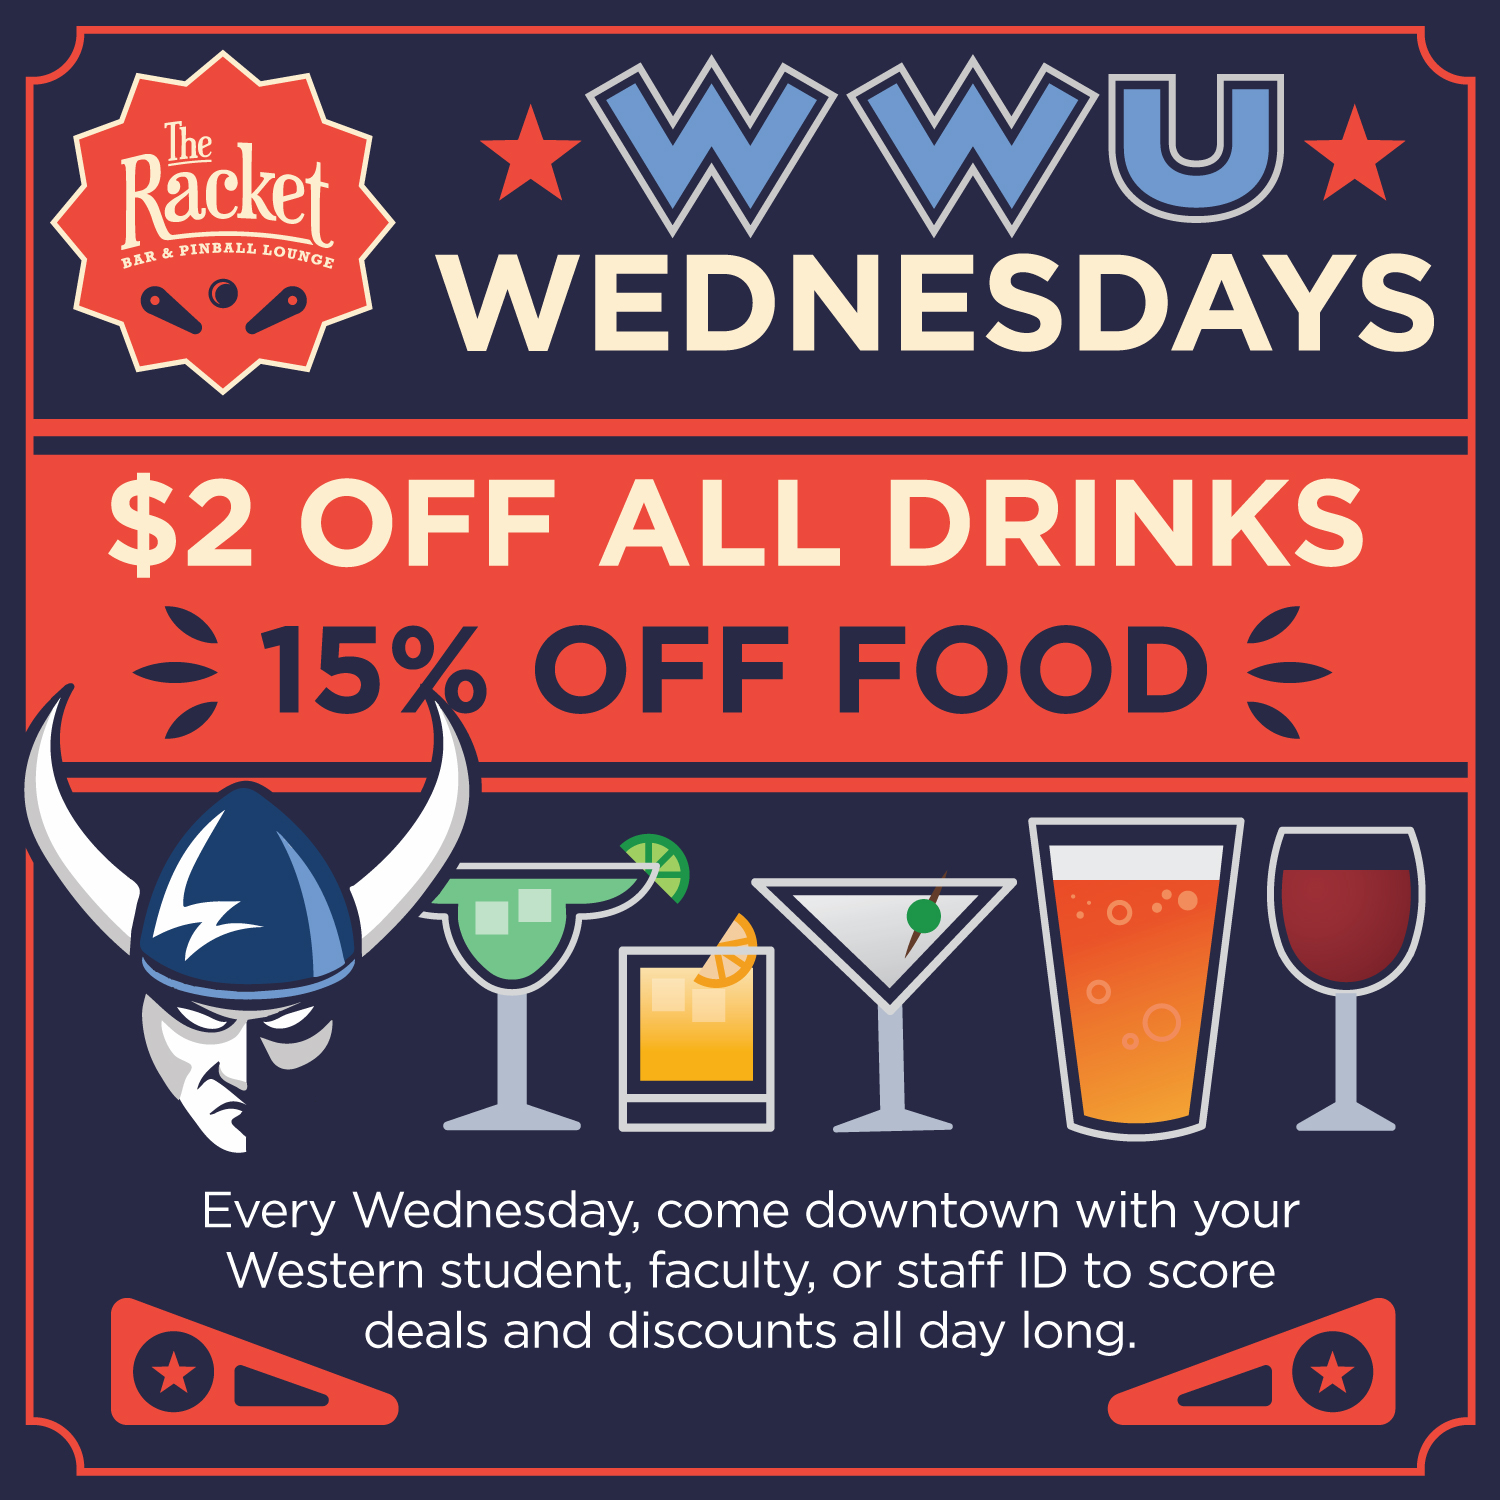 WWU Wednesday at the Racket $2 off all drinks 15% off food 